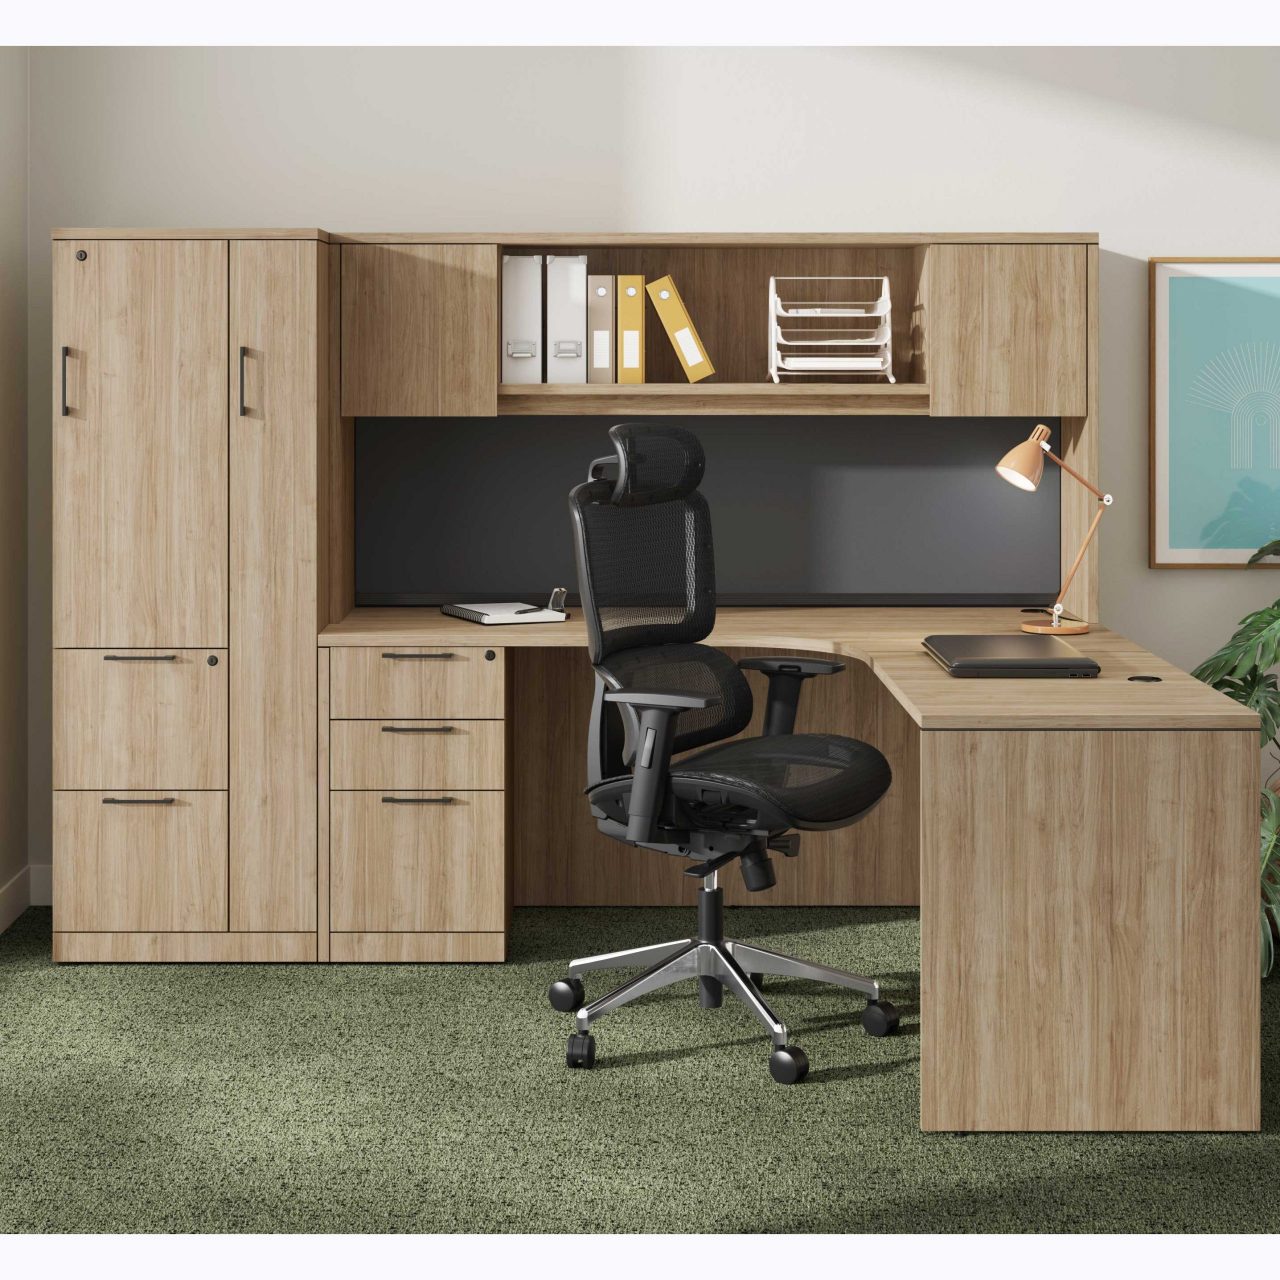 https://www.officefurnitureez.com/wp-content/uploads/2020/09/L-Shaped-Desk-with-File-Cabinet-and-Overhead-Storage-scaled.jpg